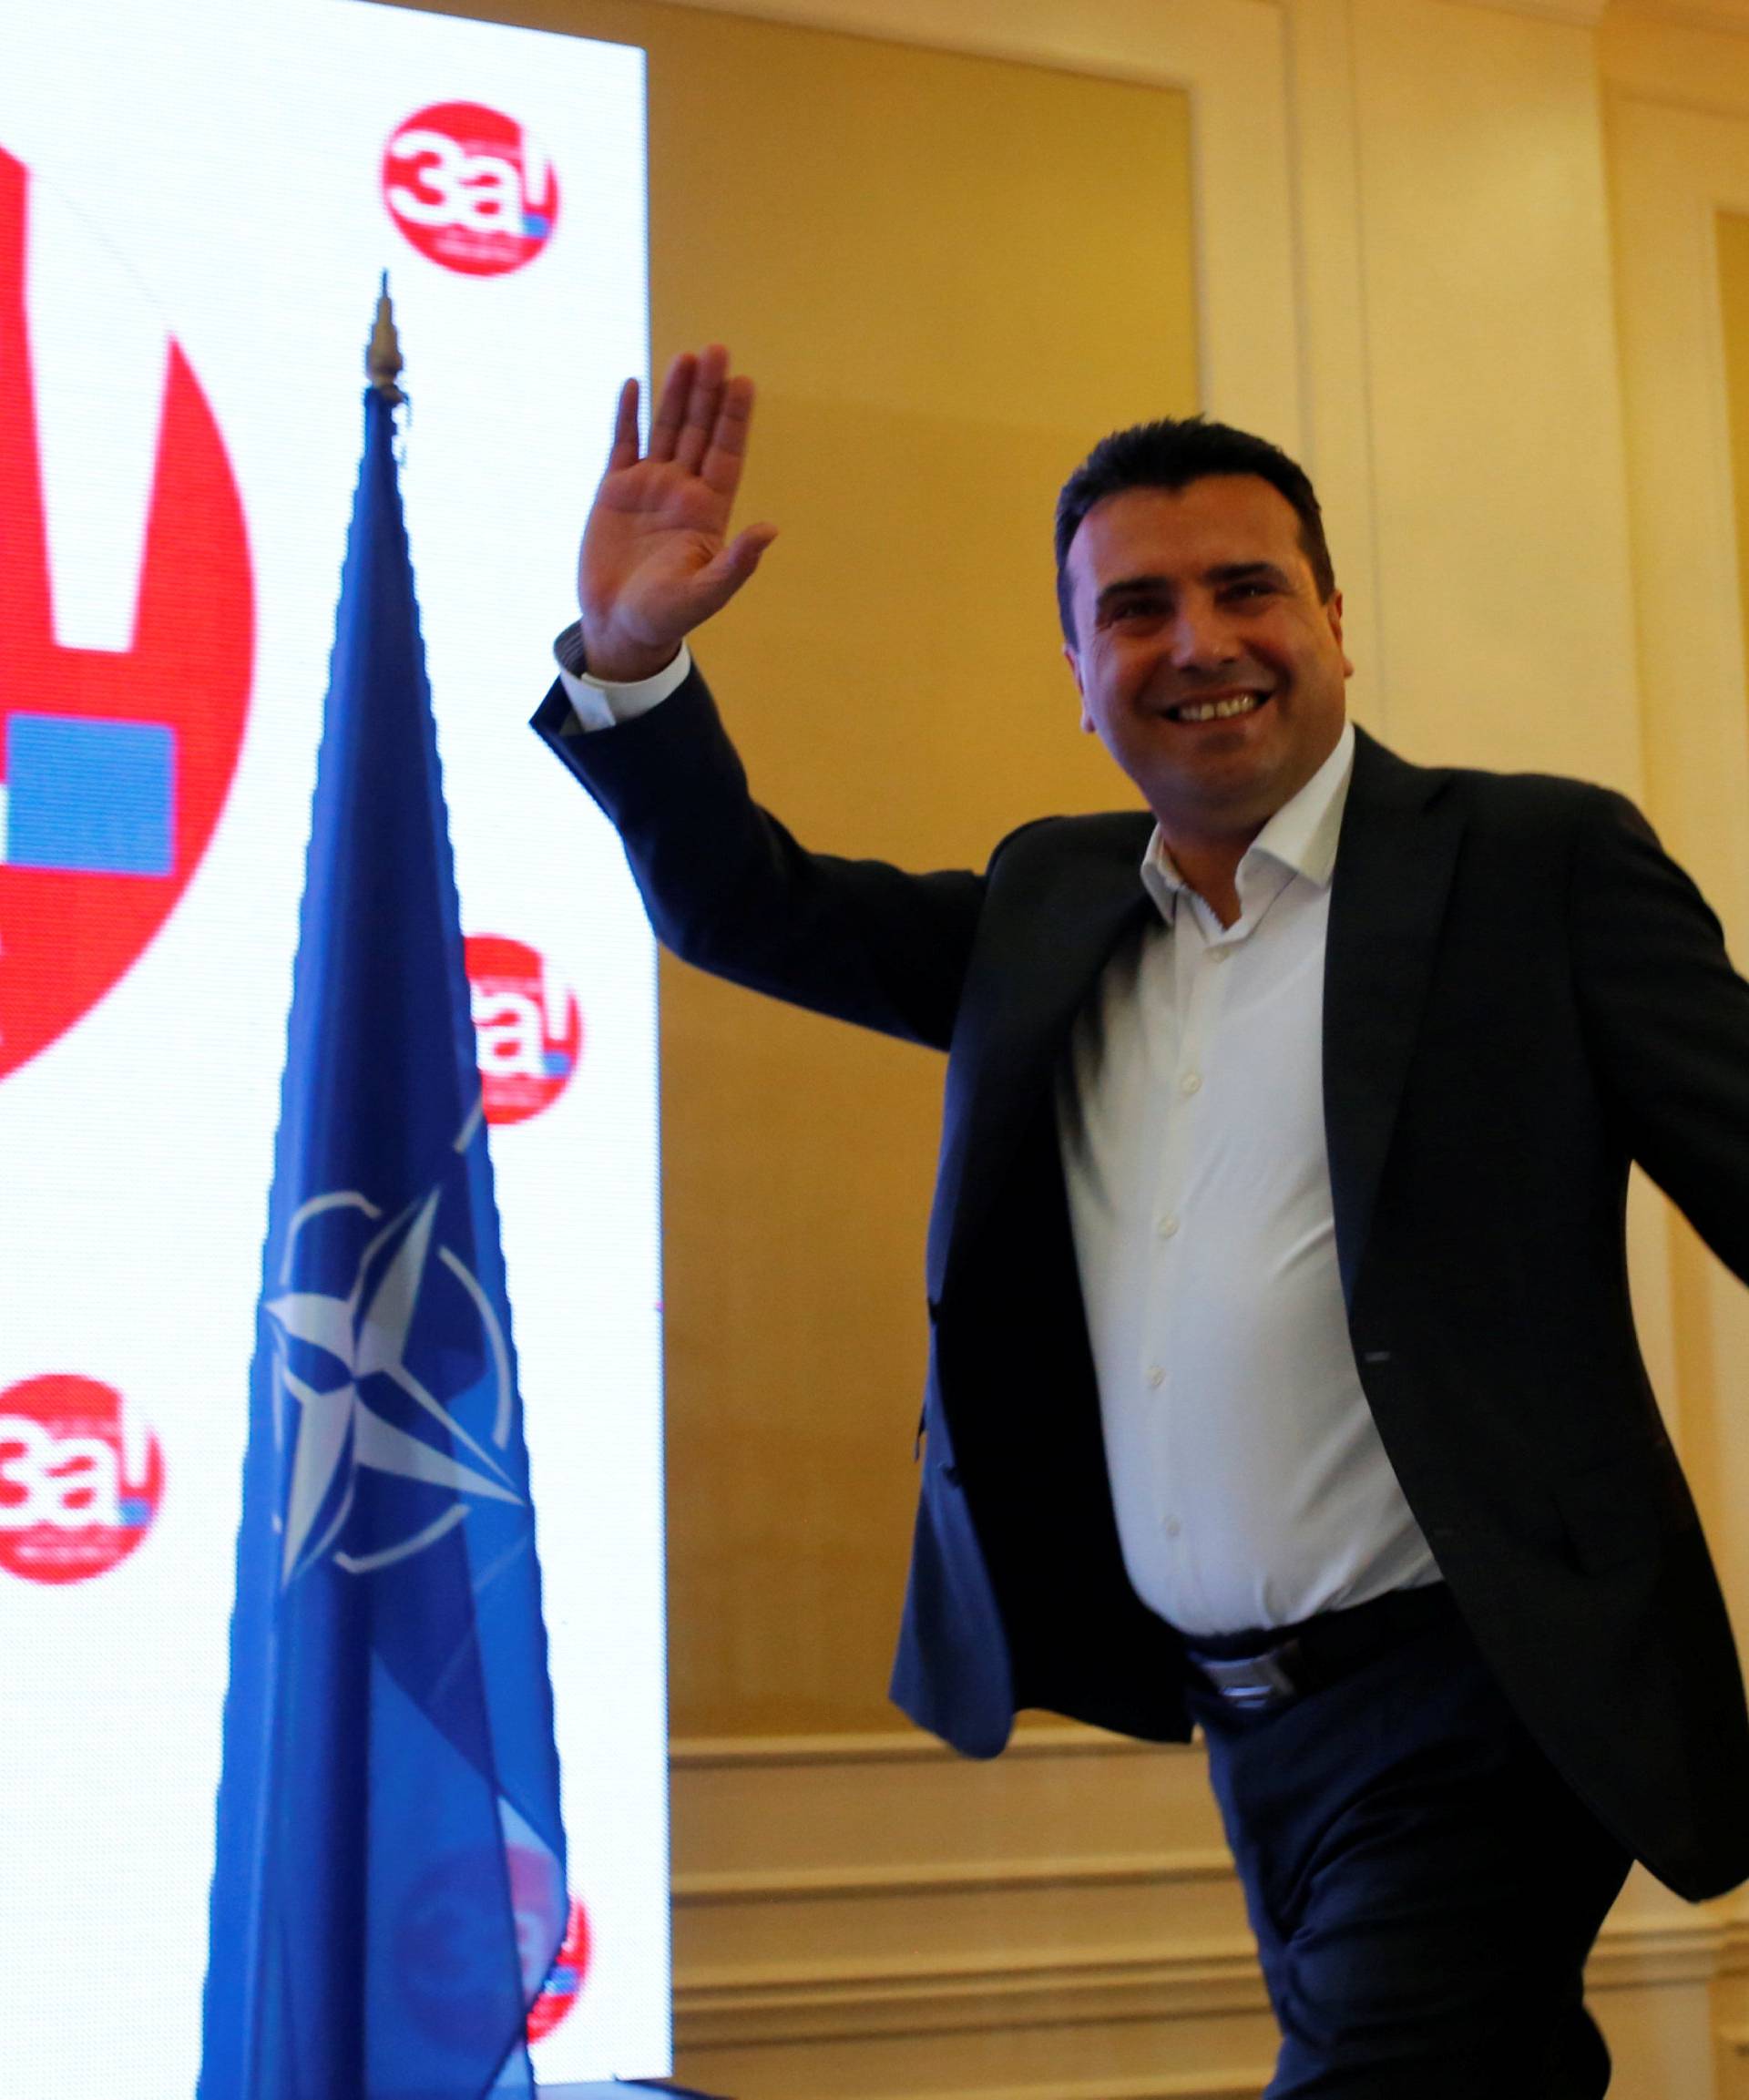 Macedonia's PM Zoran Zaev arrives to give a news conference during a referendum night on changing Macedonia's name that would open the way for it to join NATO and the European Union in Skopje